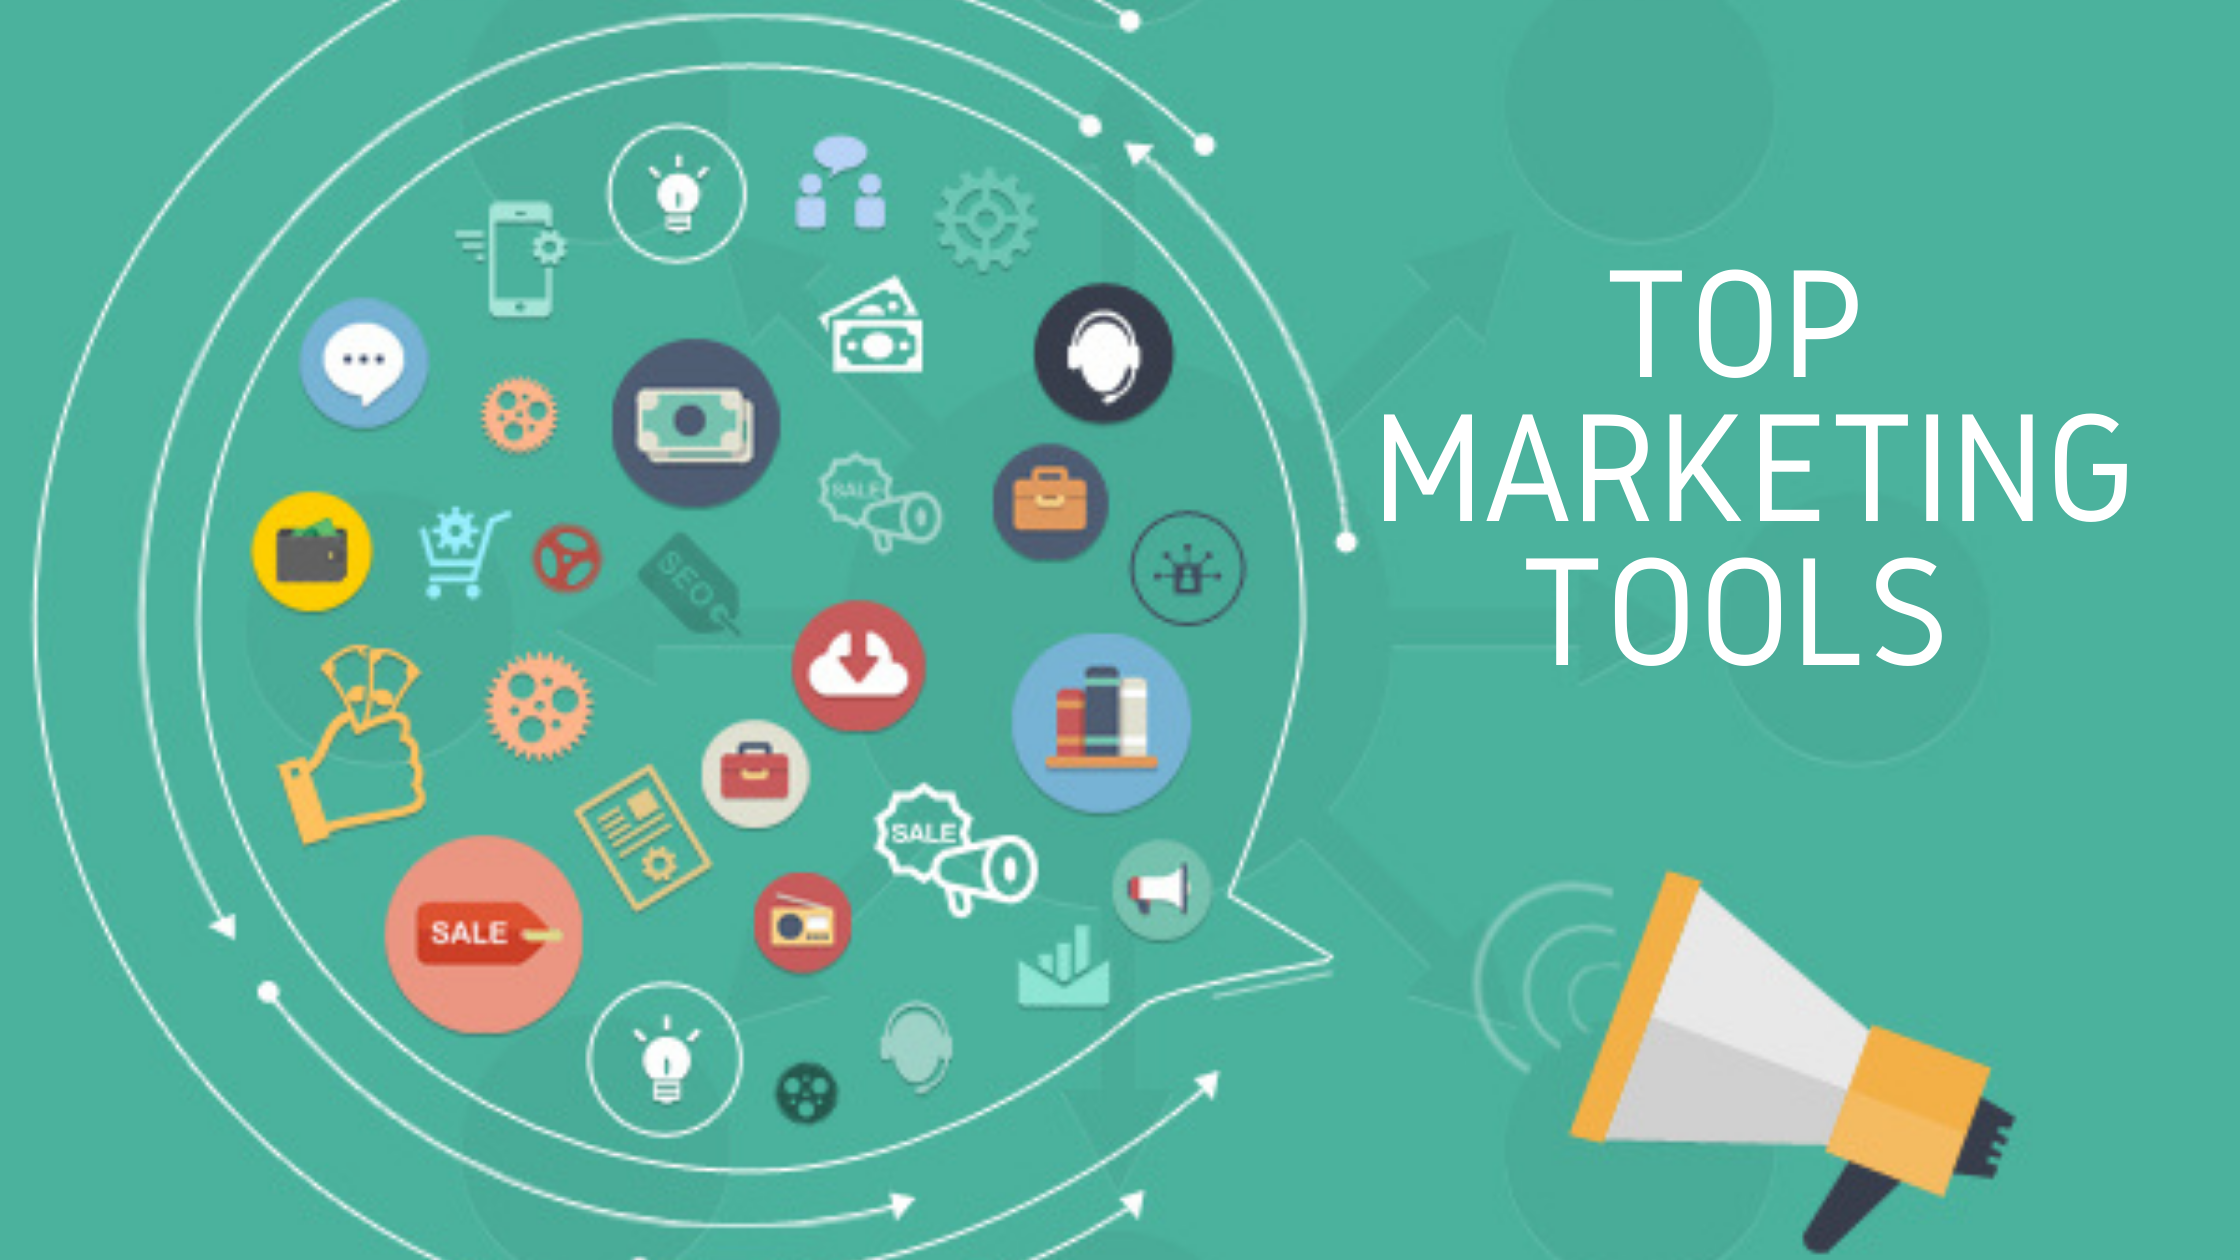 Top 27 Marketing Tools (to Make You a Smart Marketer!)